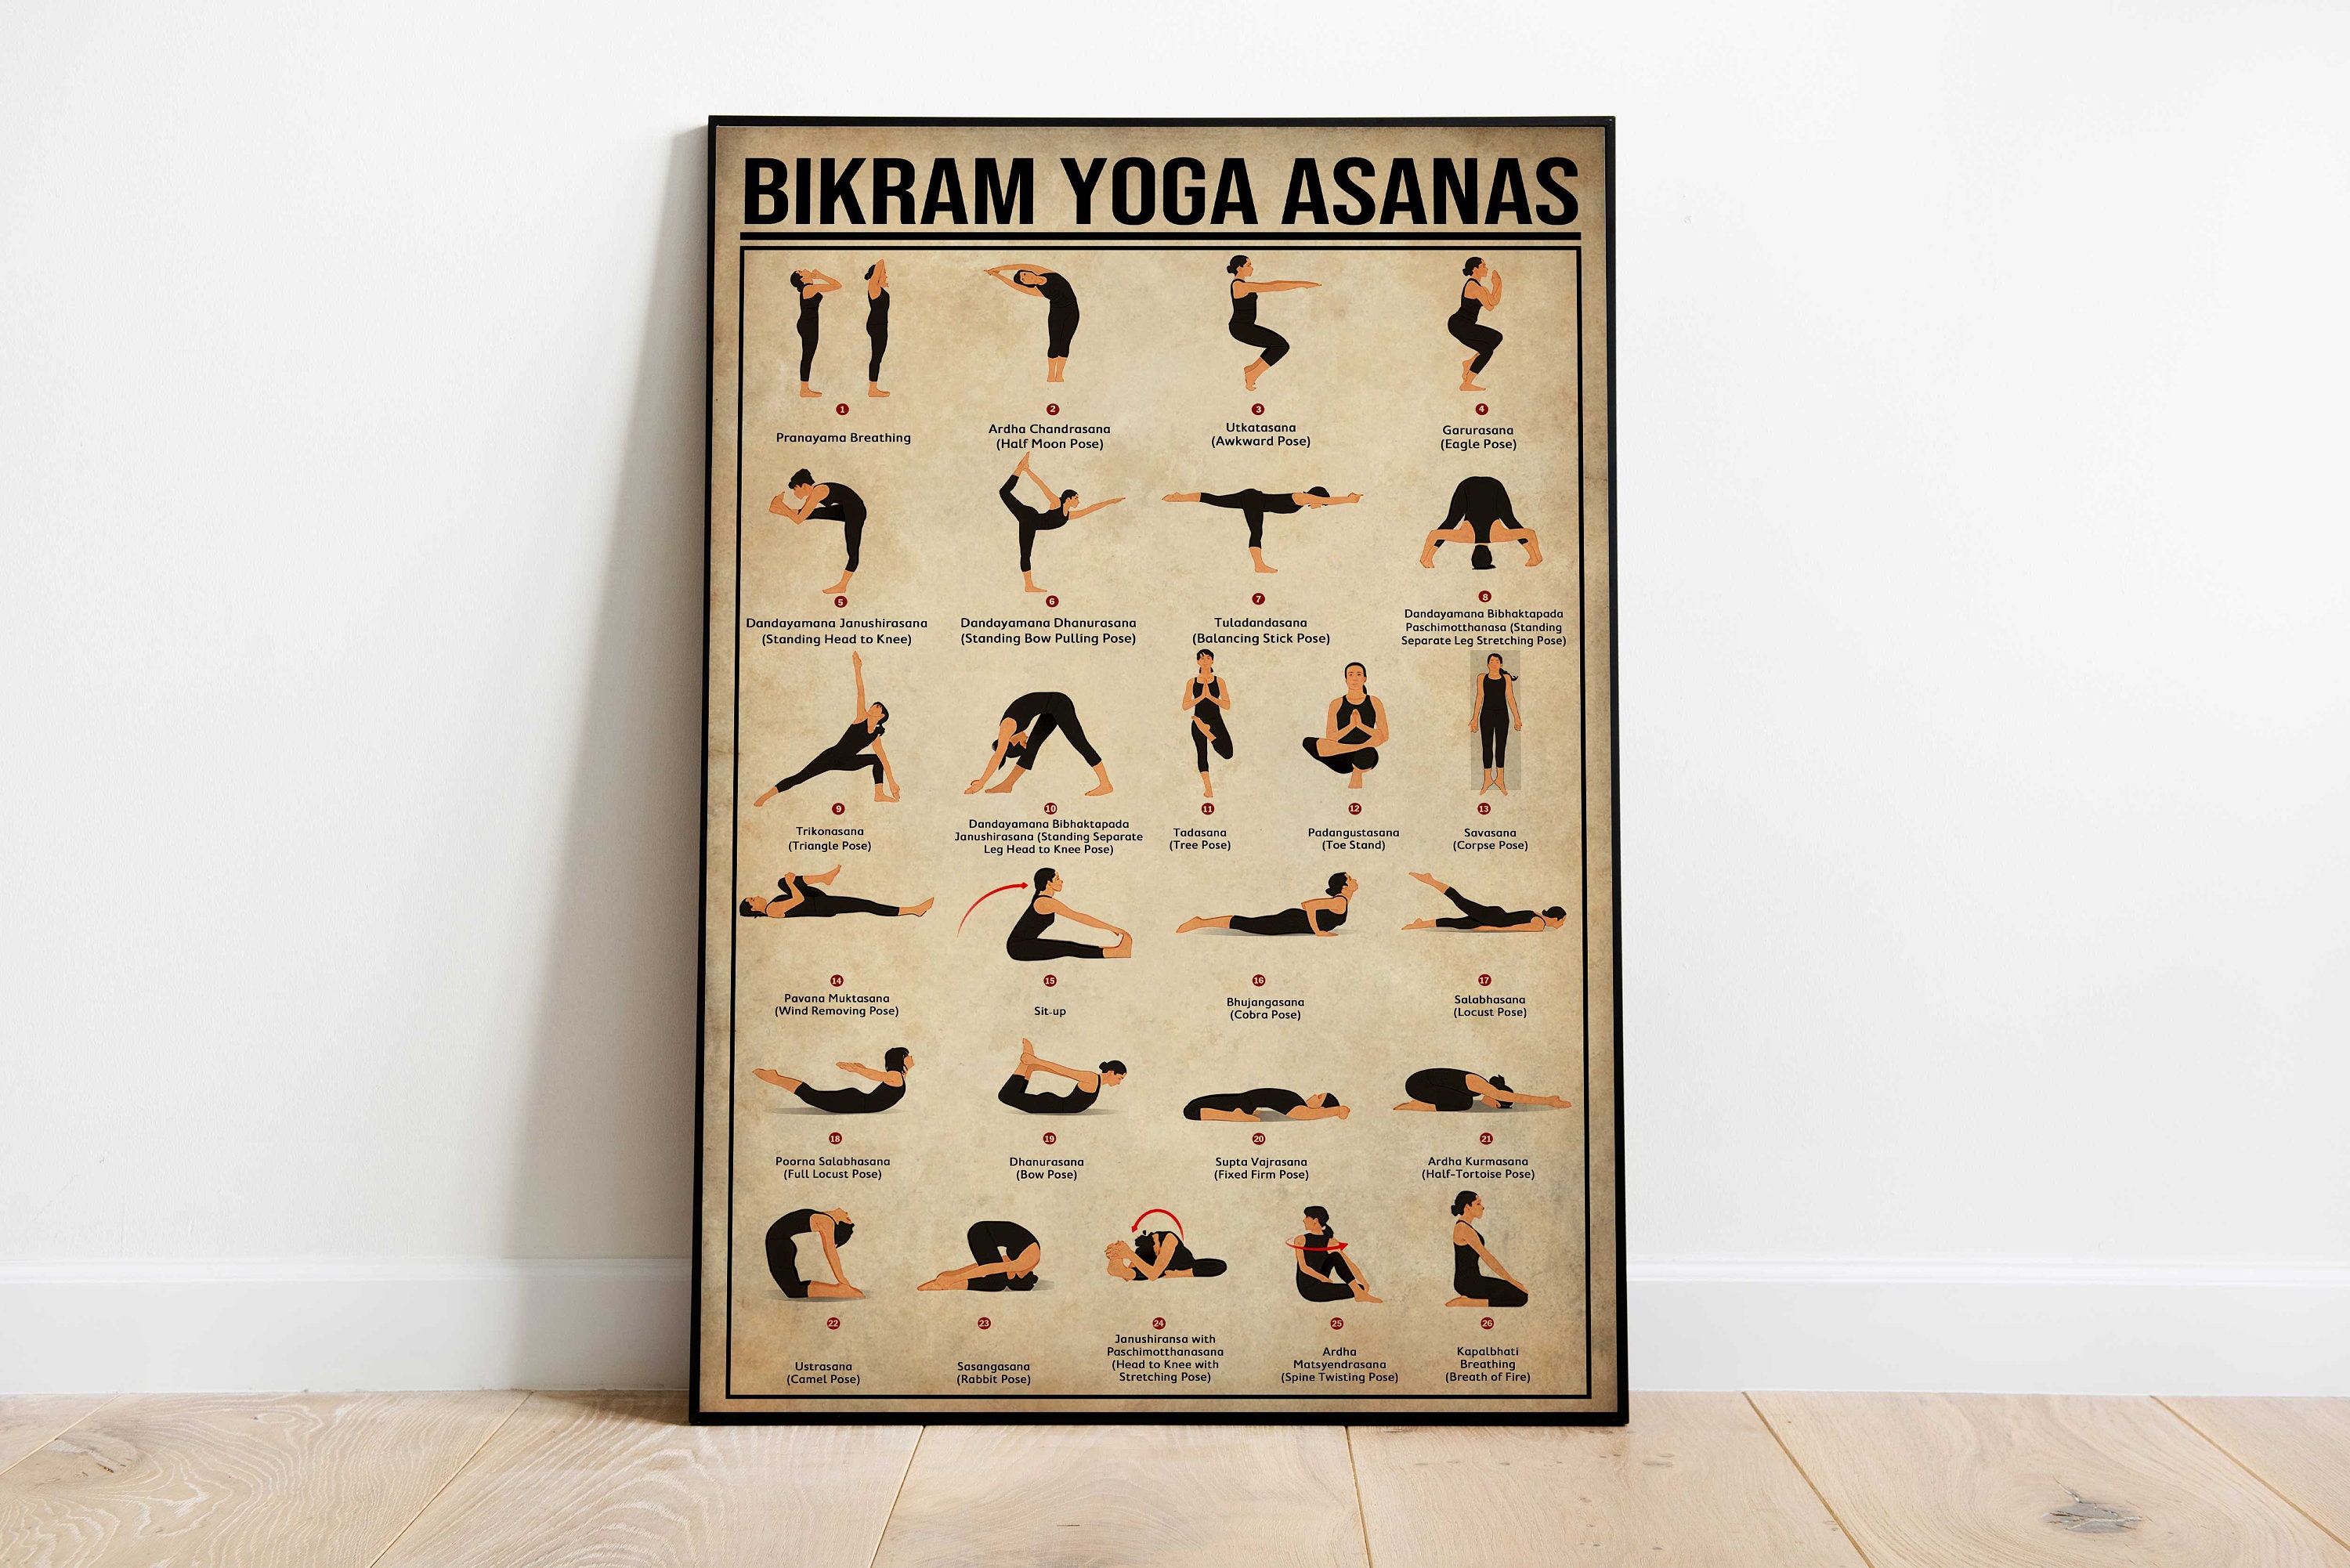 The Complete Guide to the 26 Bikram Yoga Poses - The Yoga Nomads